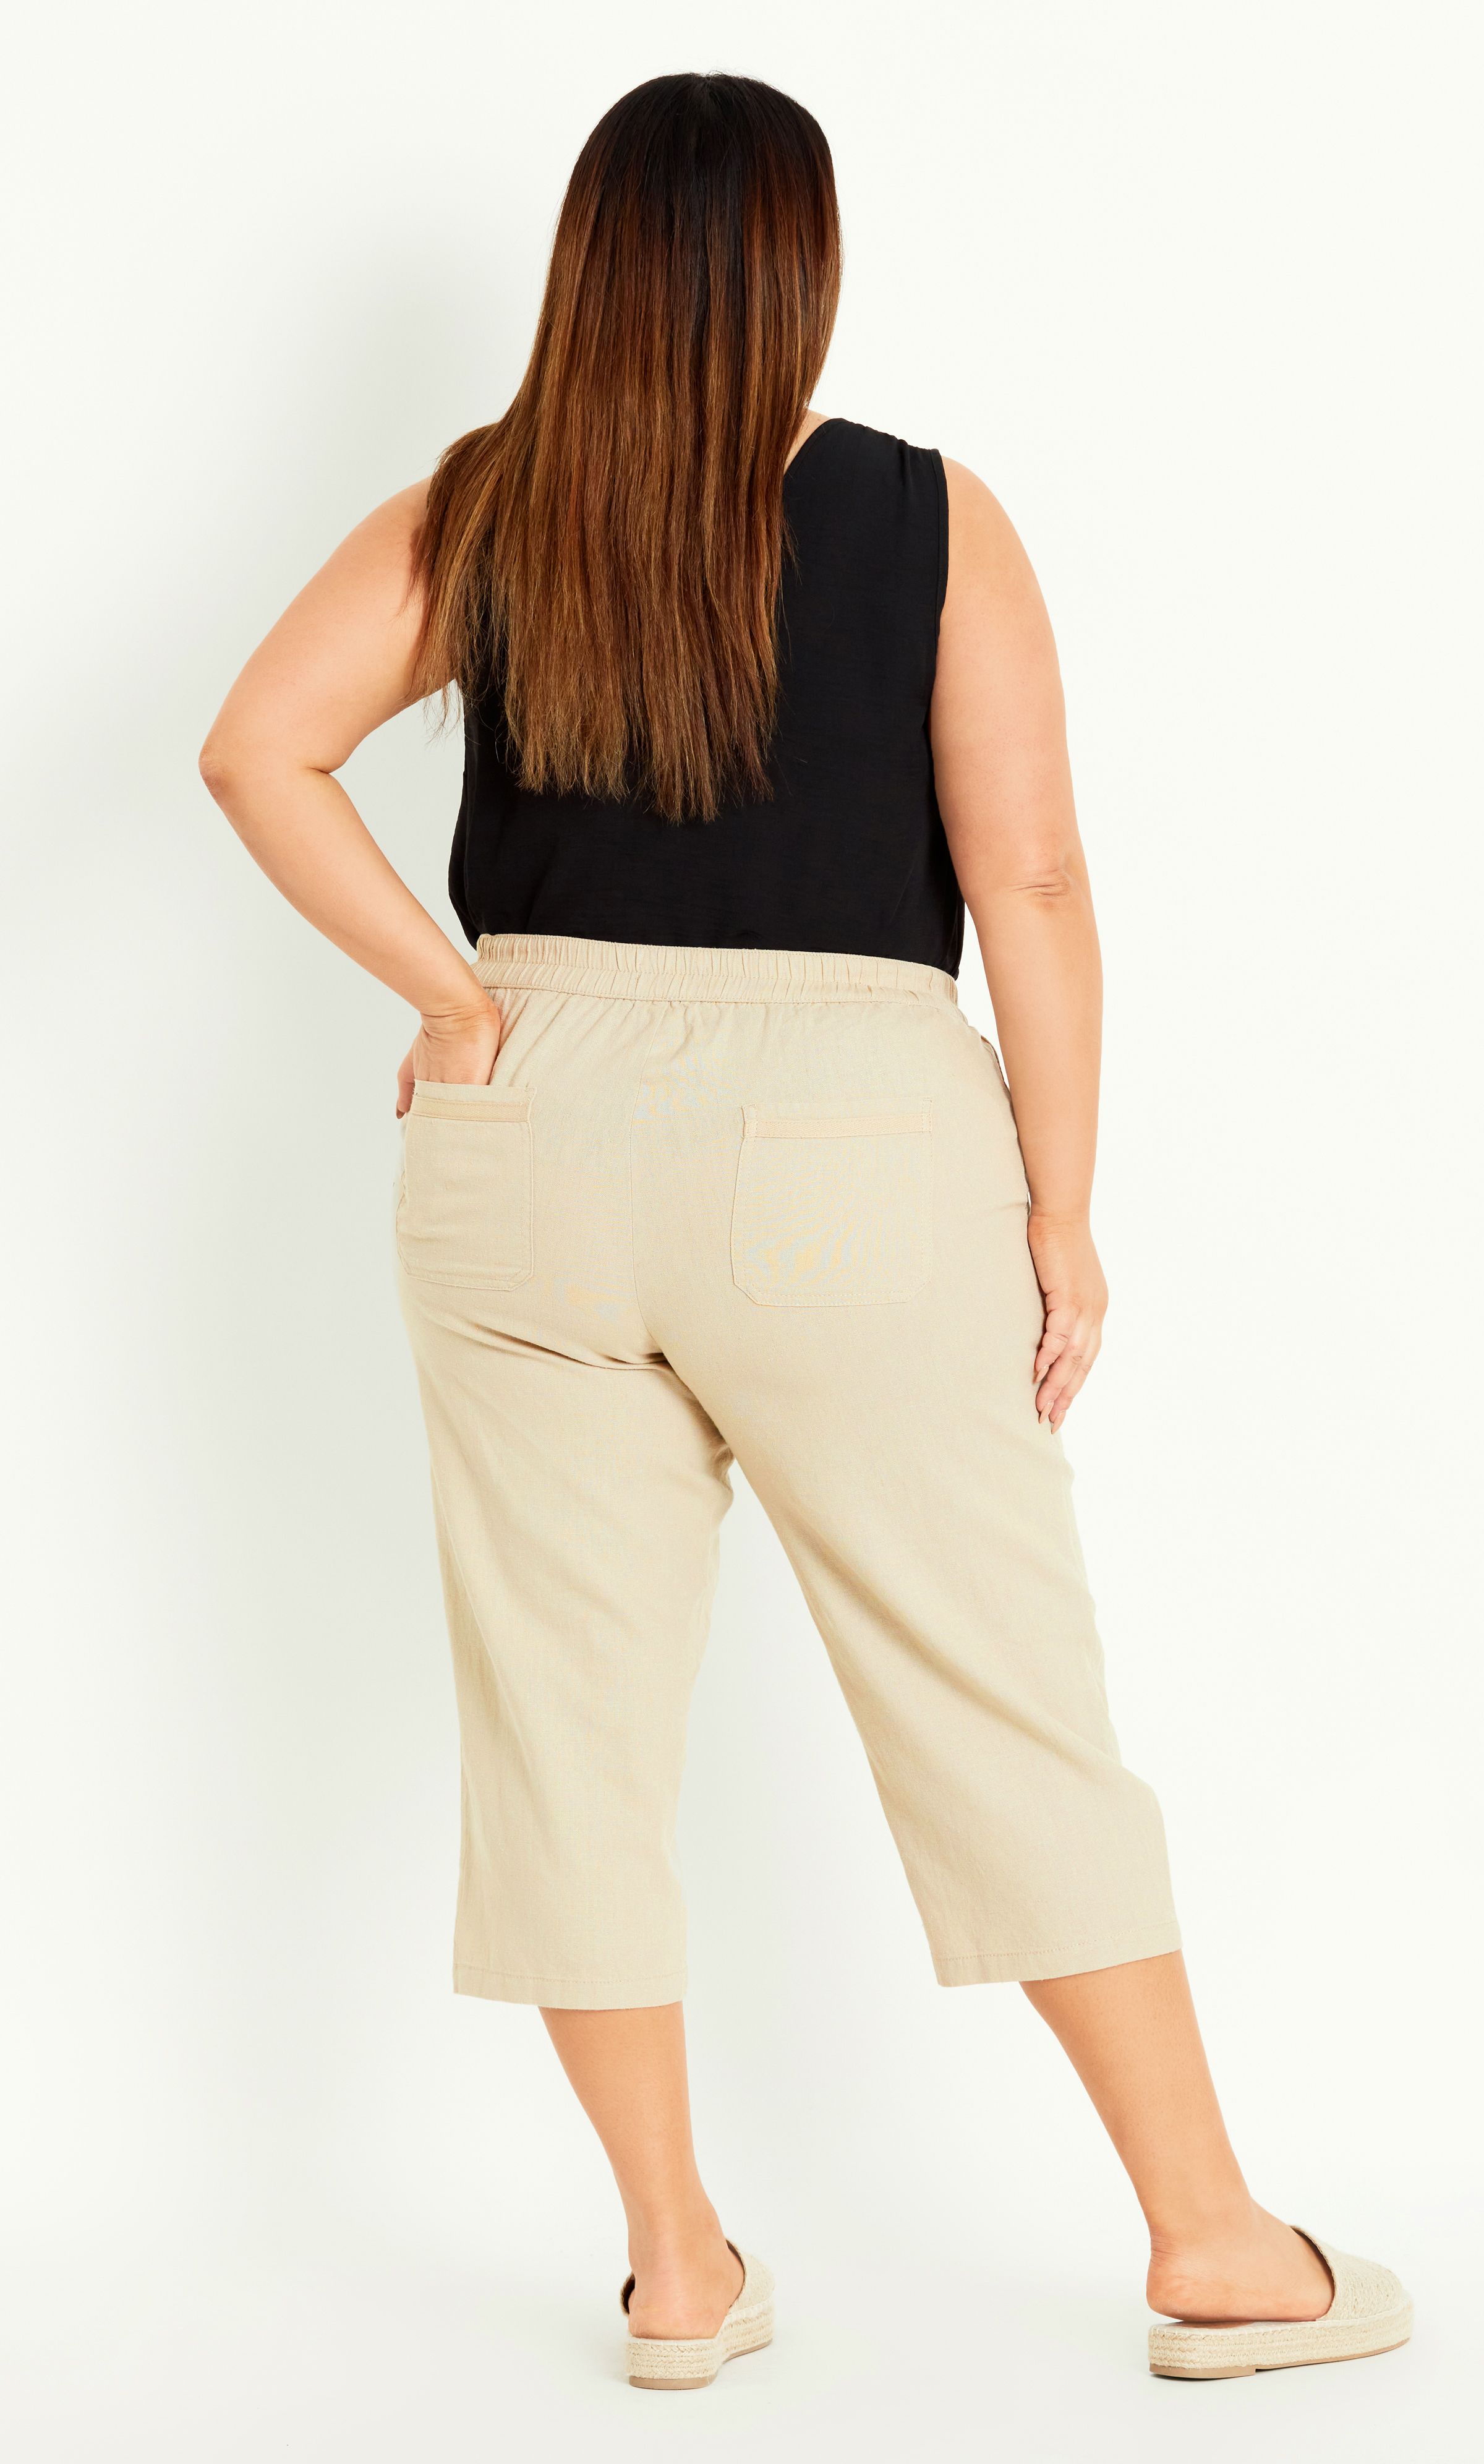 Channel a simple yet stylish summer look in our oh-so timeless and versatile Linen Blend Crop Trouser. Offering a comfortable elasticated waist and quality linen blend fabrication, this fashion-forward pair ticks some serious style boxes! Key Features Include: - Elasticated waist with drawstring - Four pockets - Linen blend fabrication - Relaxed leg - Unlined - Pull up style - Cropped length Opt for breezy resort vibes in a button up shirt and some woven wedges.